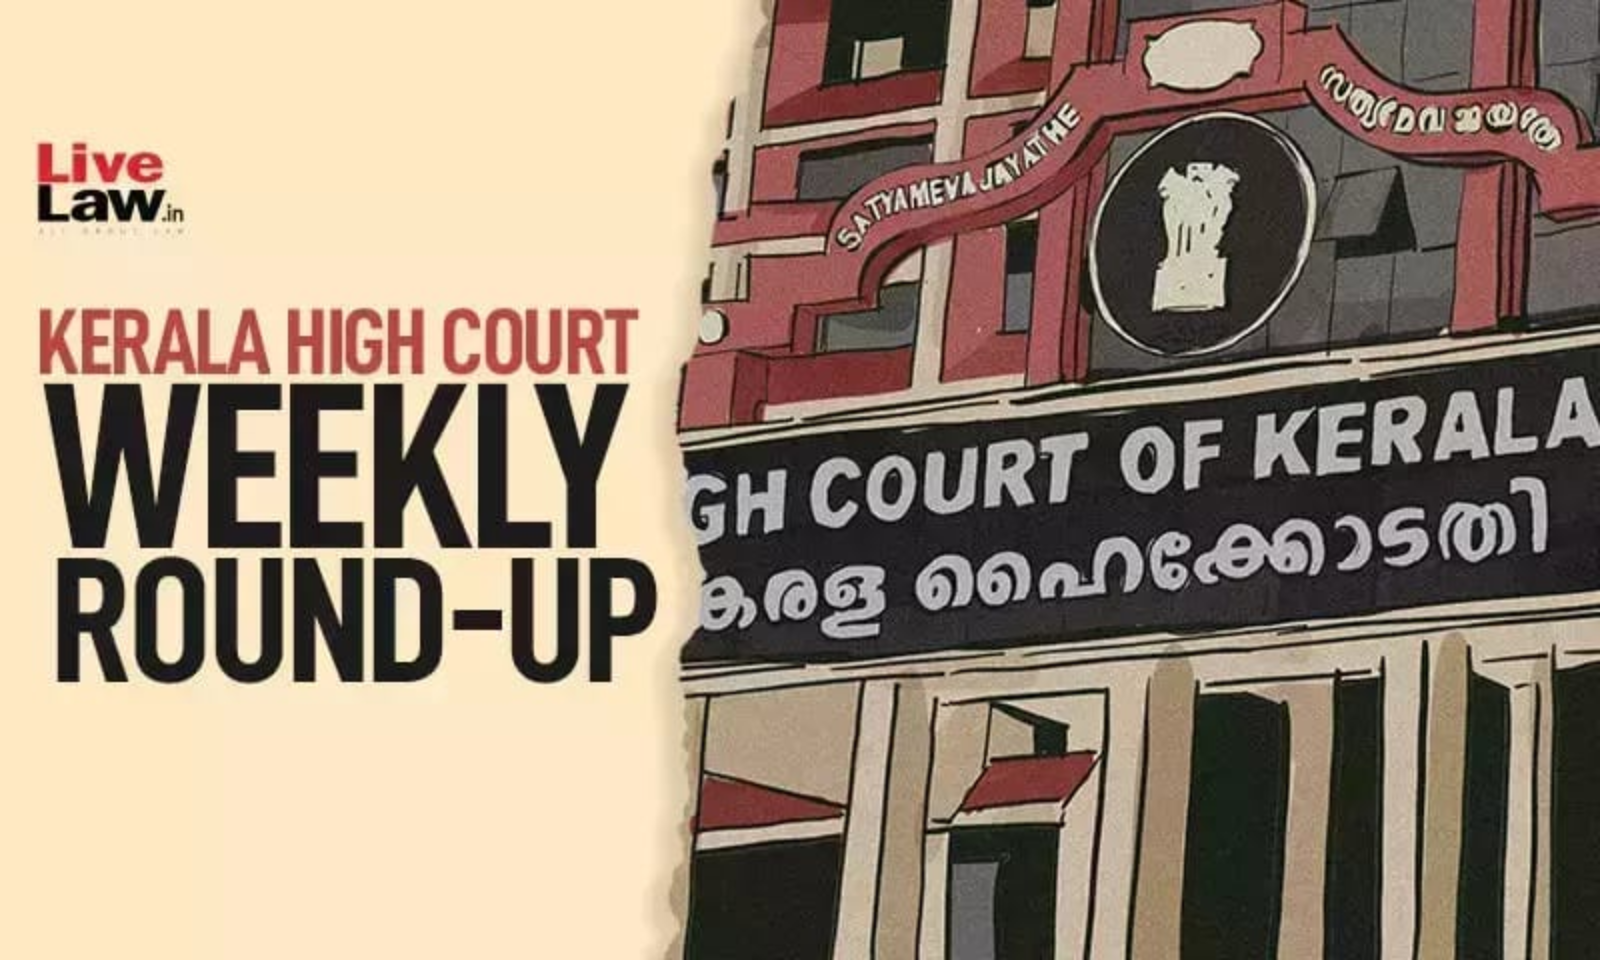 14yersxxx - Kerala High Court Weekly Round-Up: June 5 To June 11, 2023